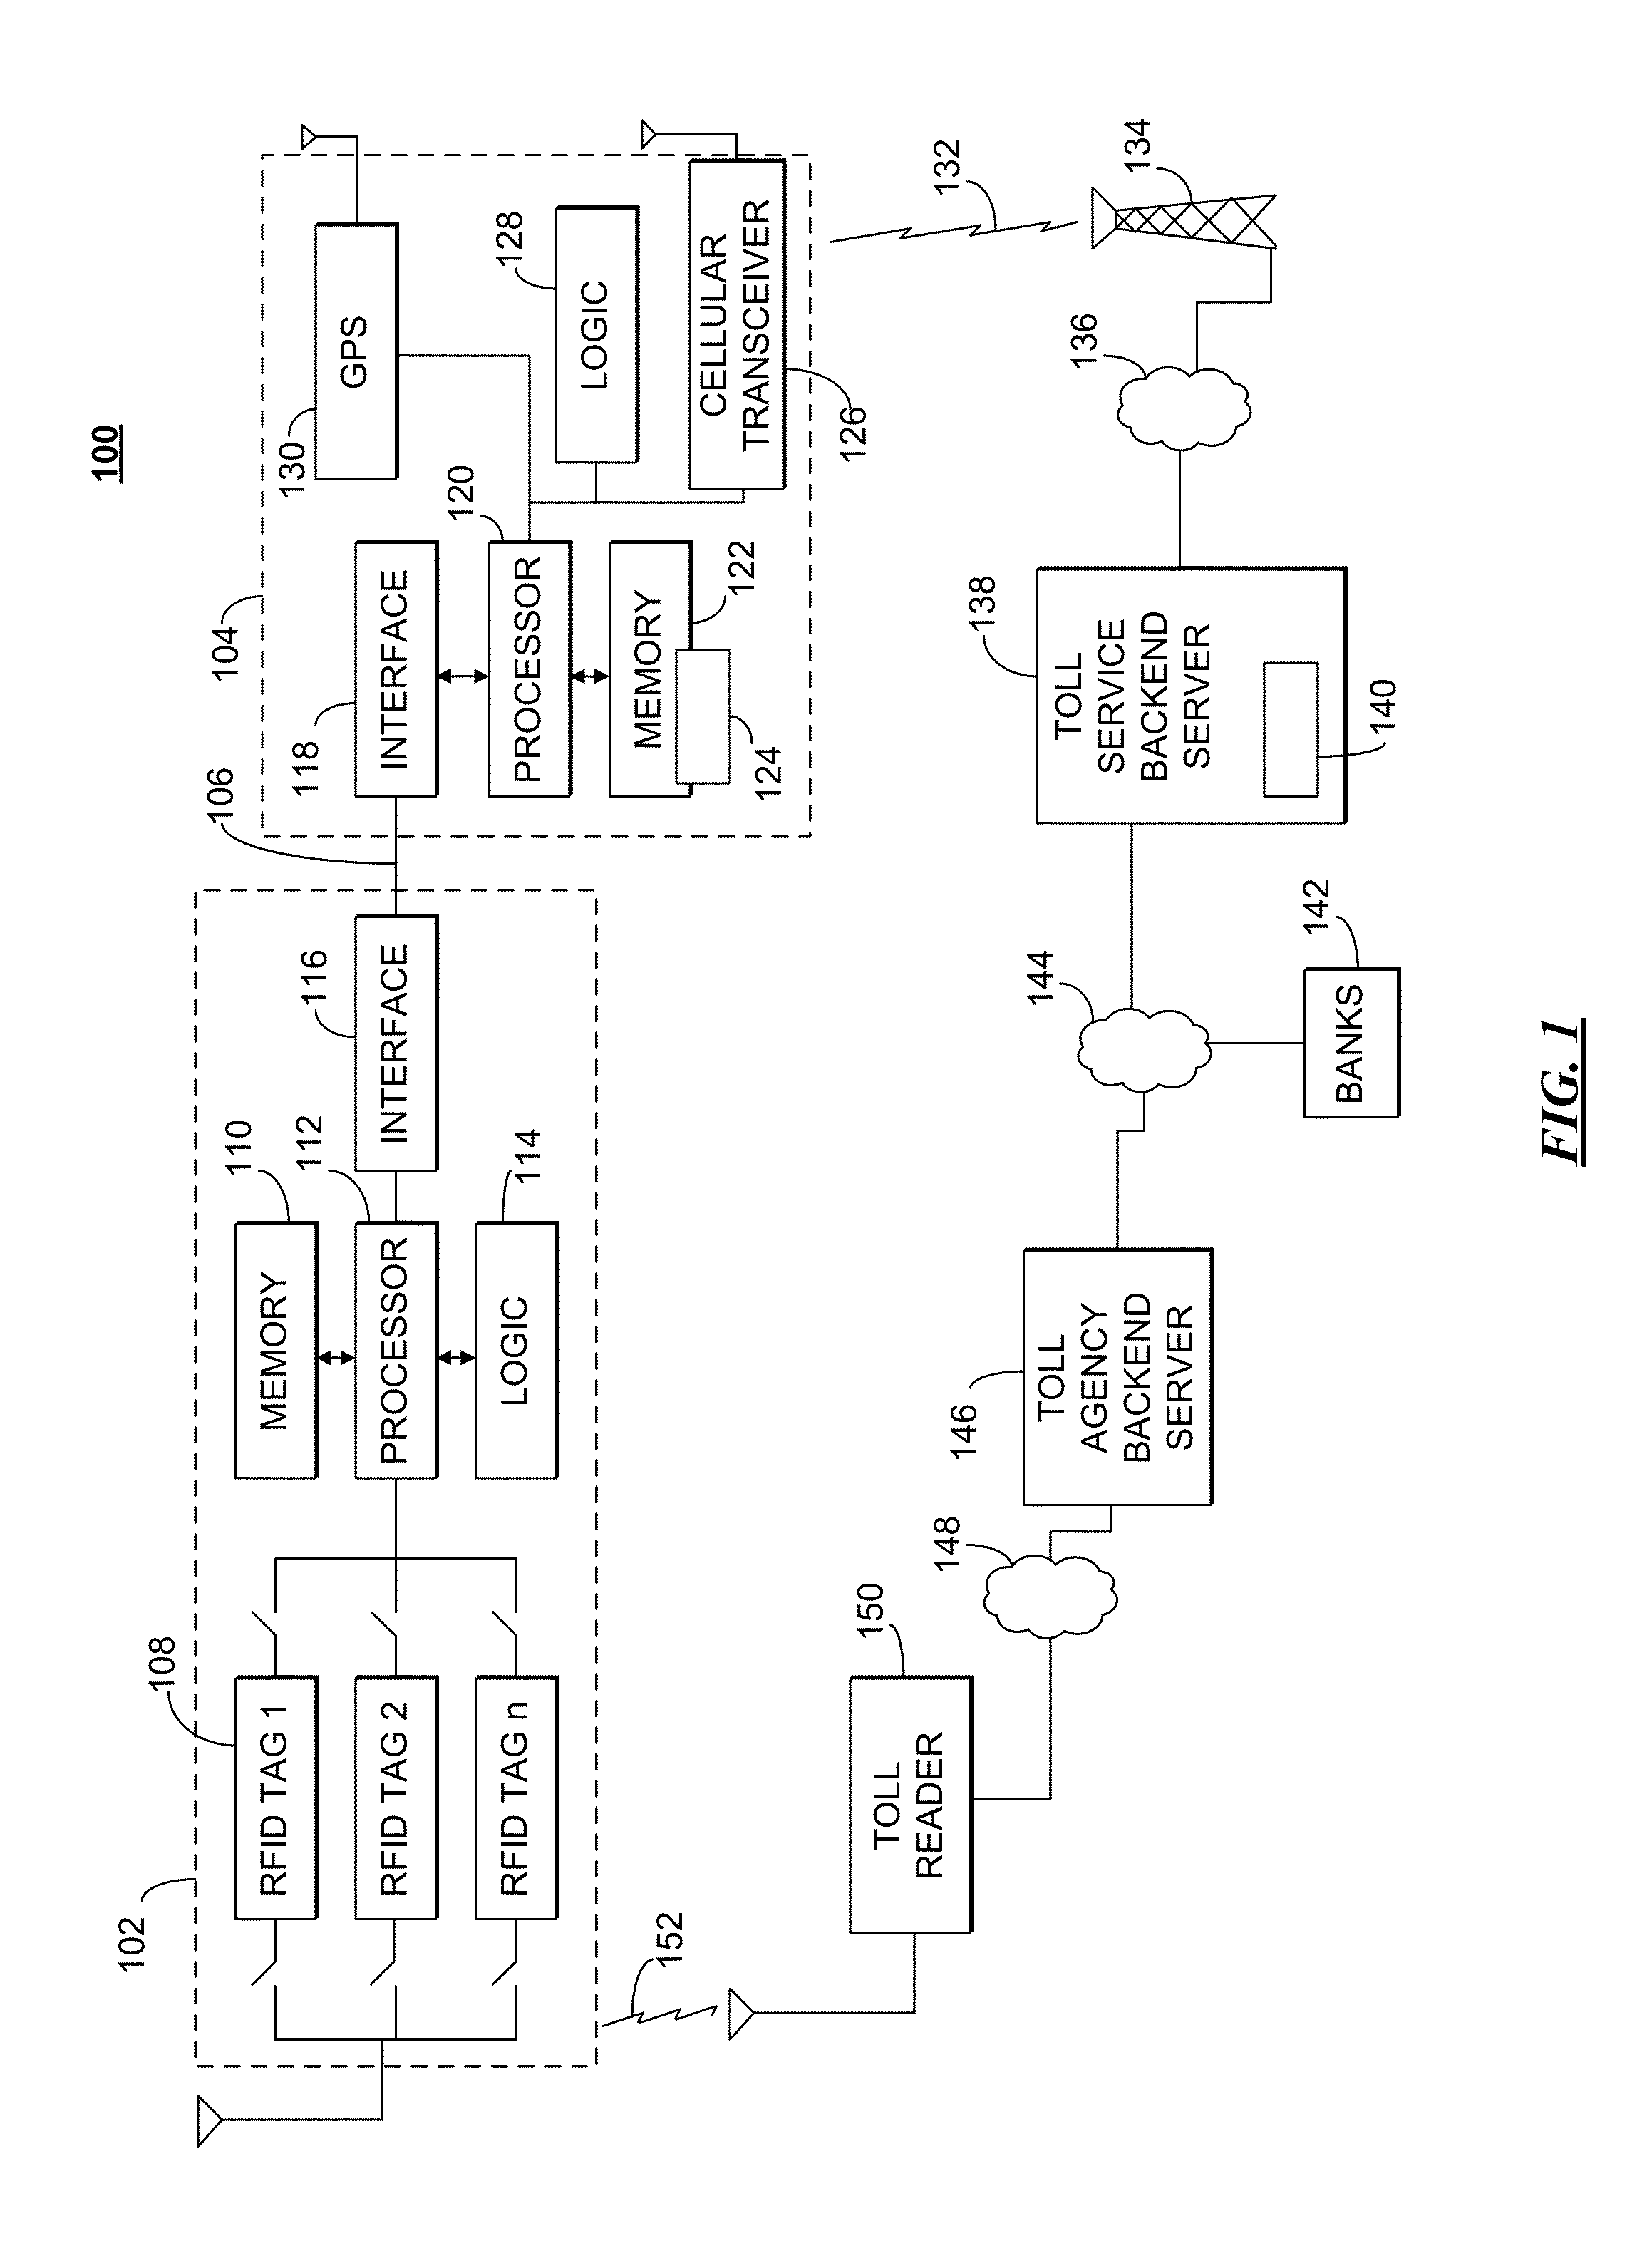 Method and apparatus for providing a toll service and flexible toll device